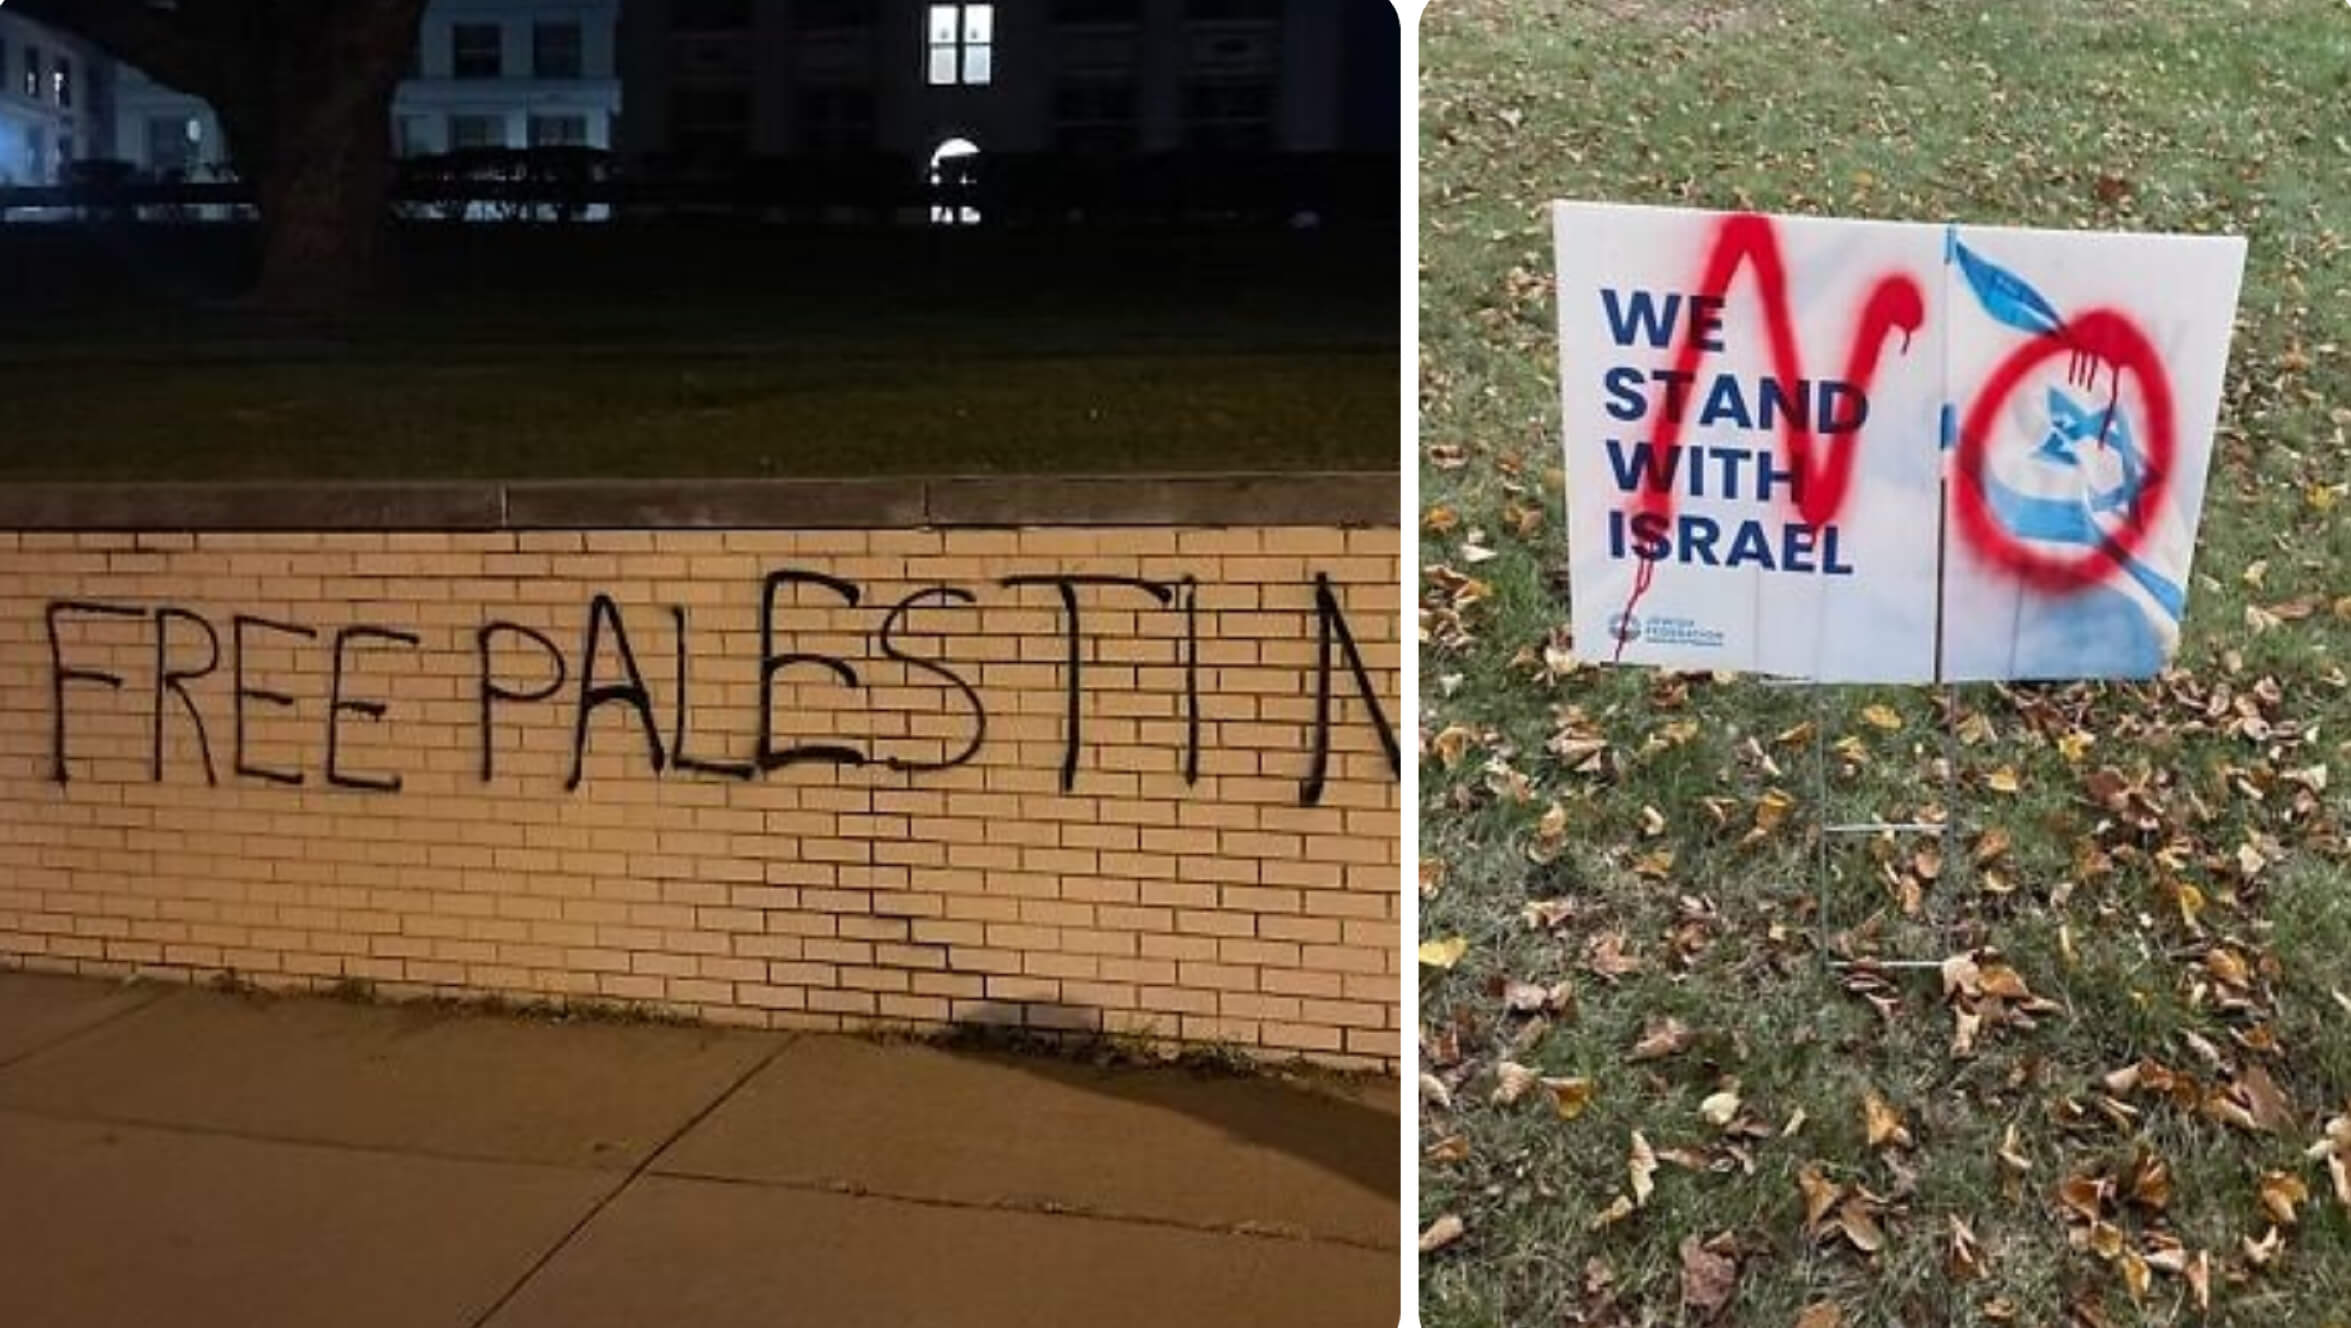 Anti-Israel vandalism was discovered in the Squirrel Hill neighborhood of Pittsburgh the day before the fifth anniversary of the massacre at the Tree of Life synagogue.